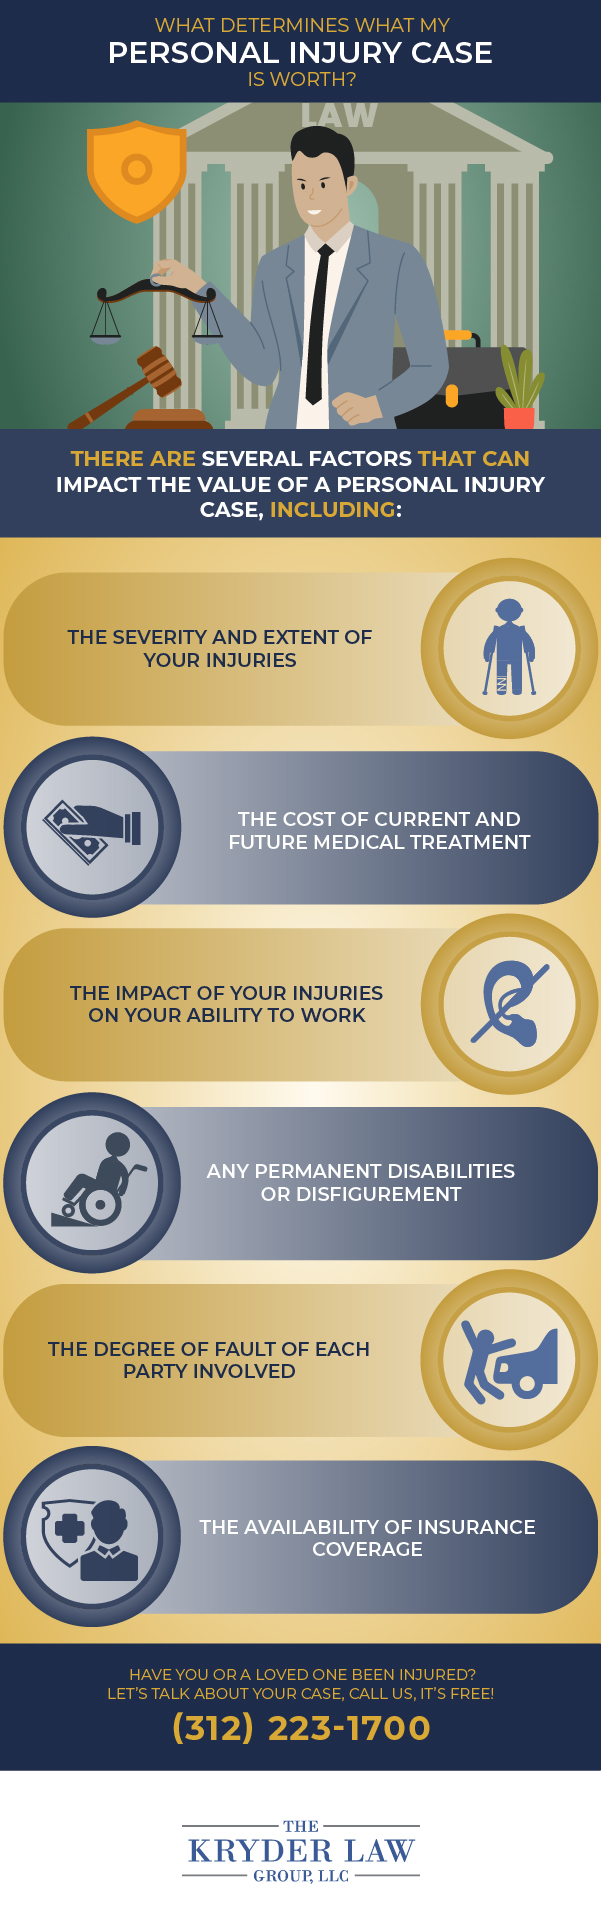 What Determines What My Personal Injury Case is Worth?